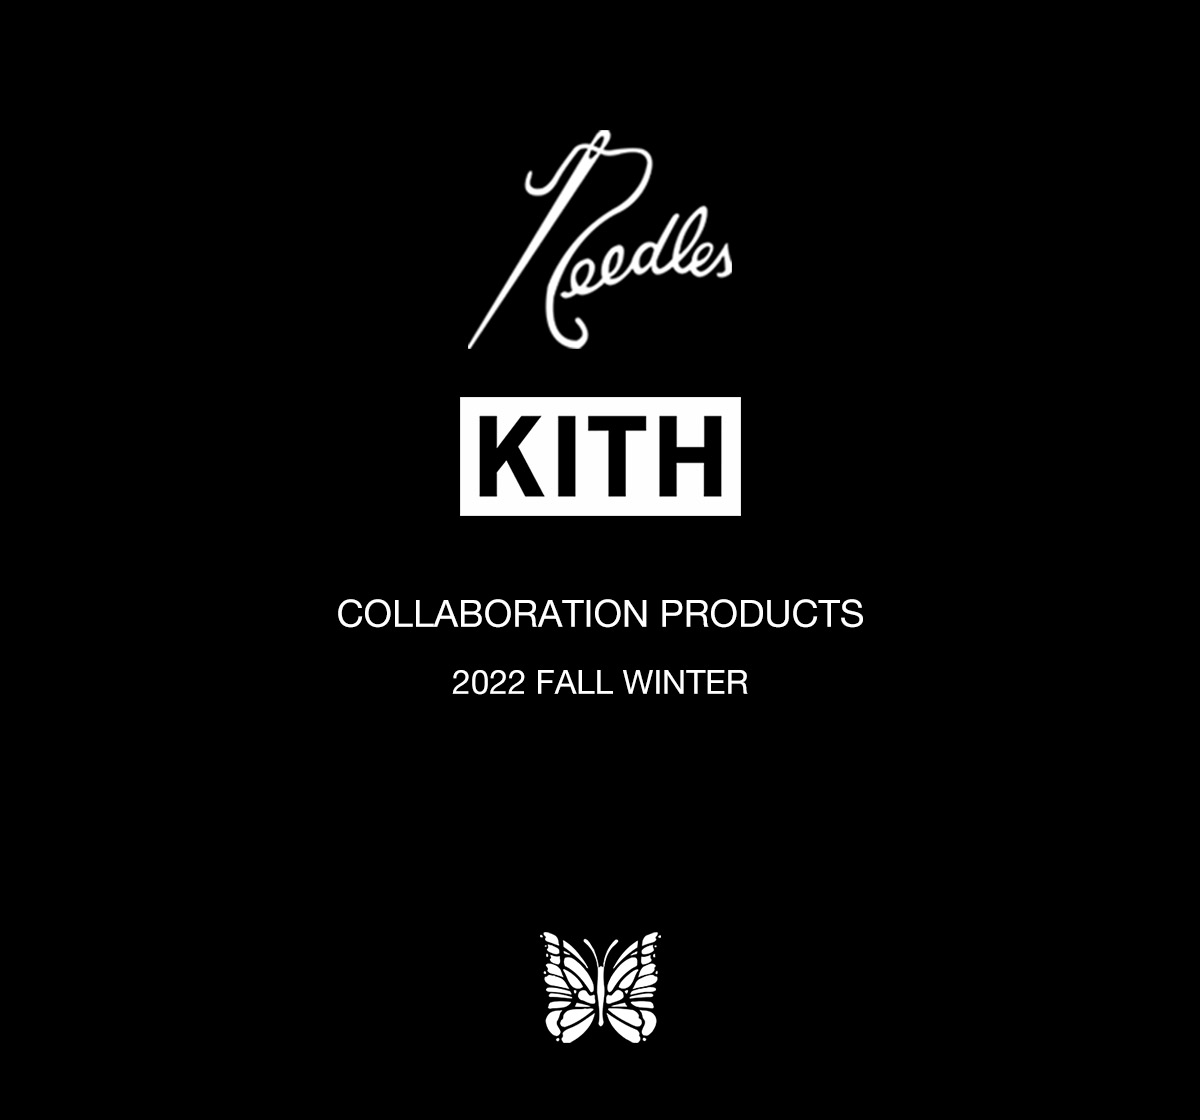 〈NEEDLES〉x〈KITH〉COLLABORATION PRODUCTS 2022 FALL WINTER